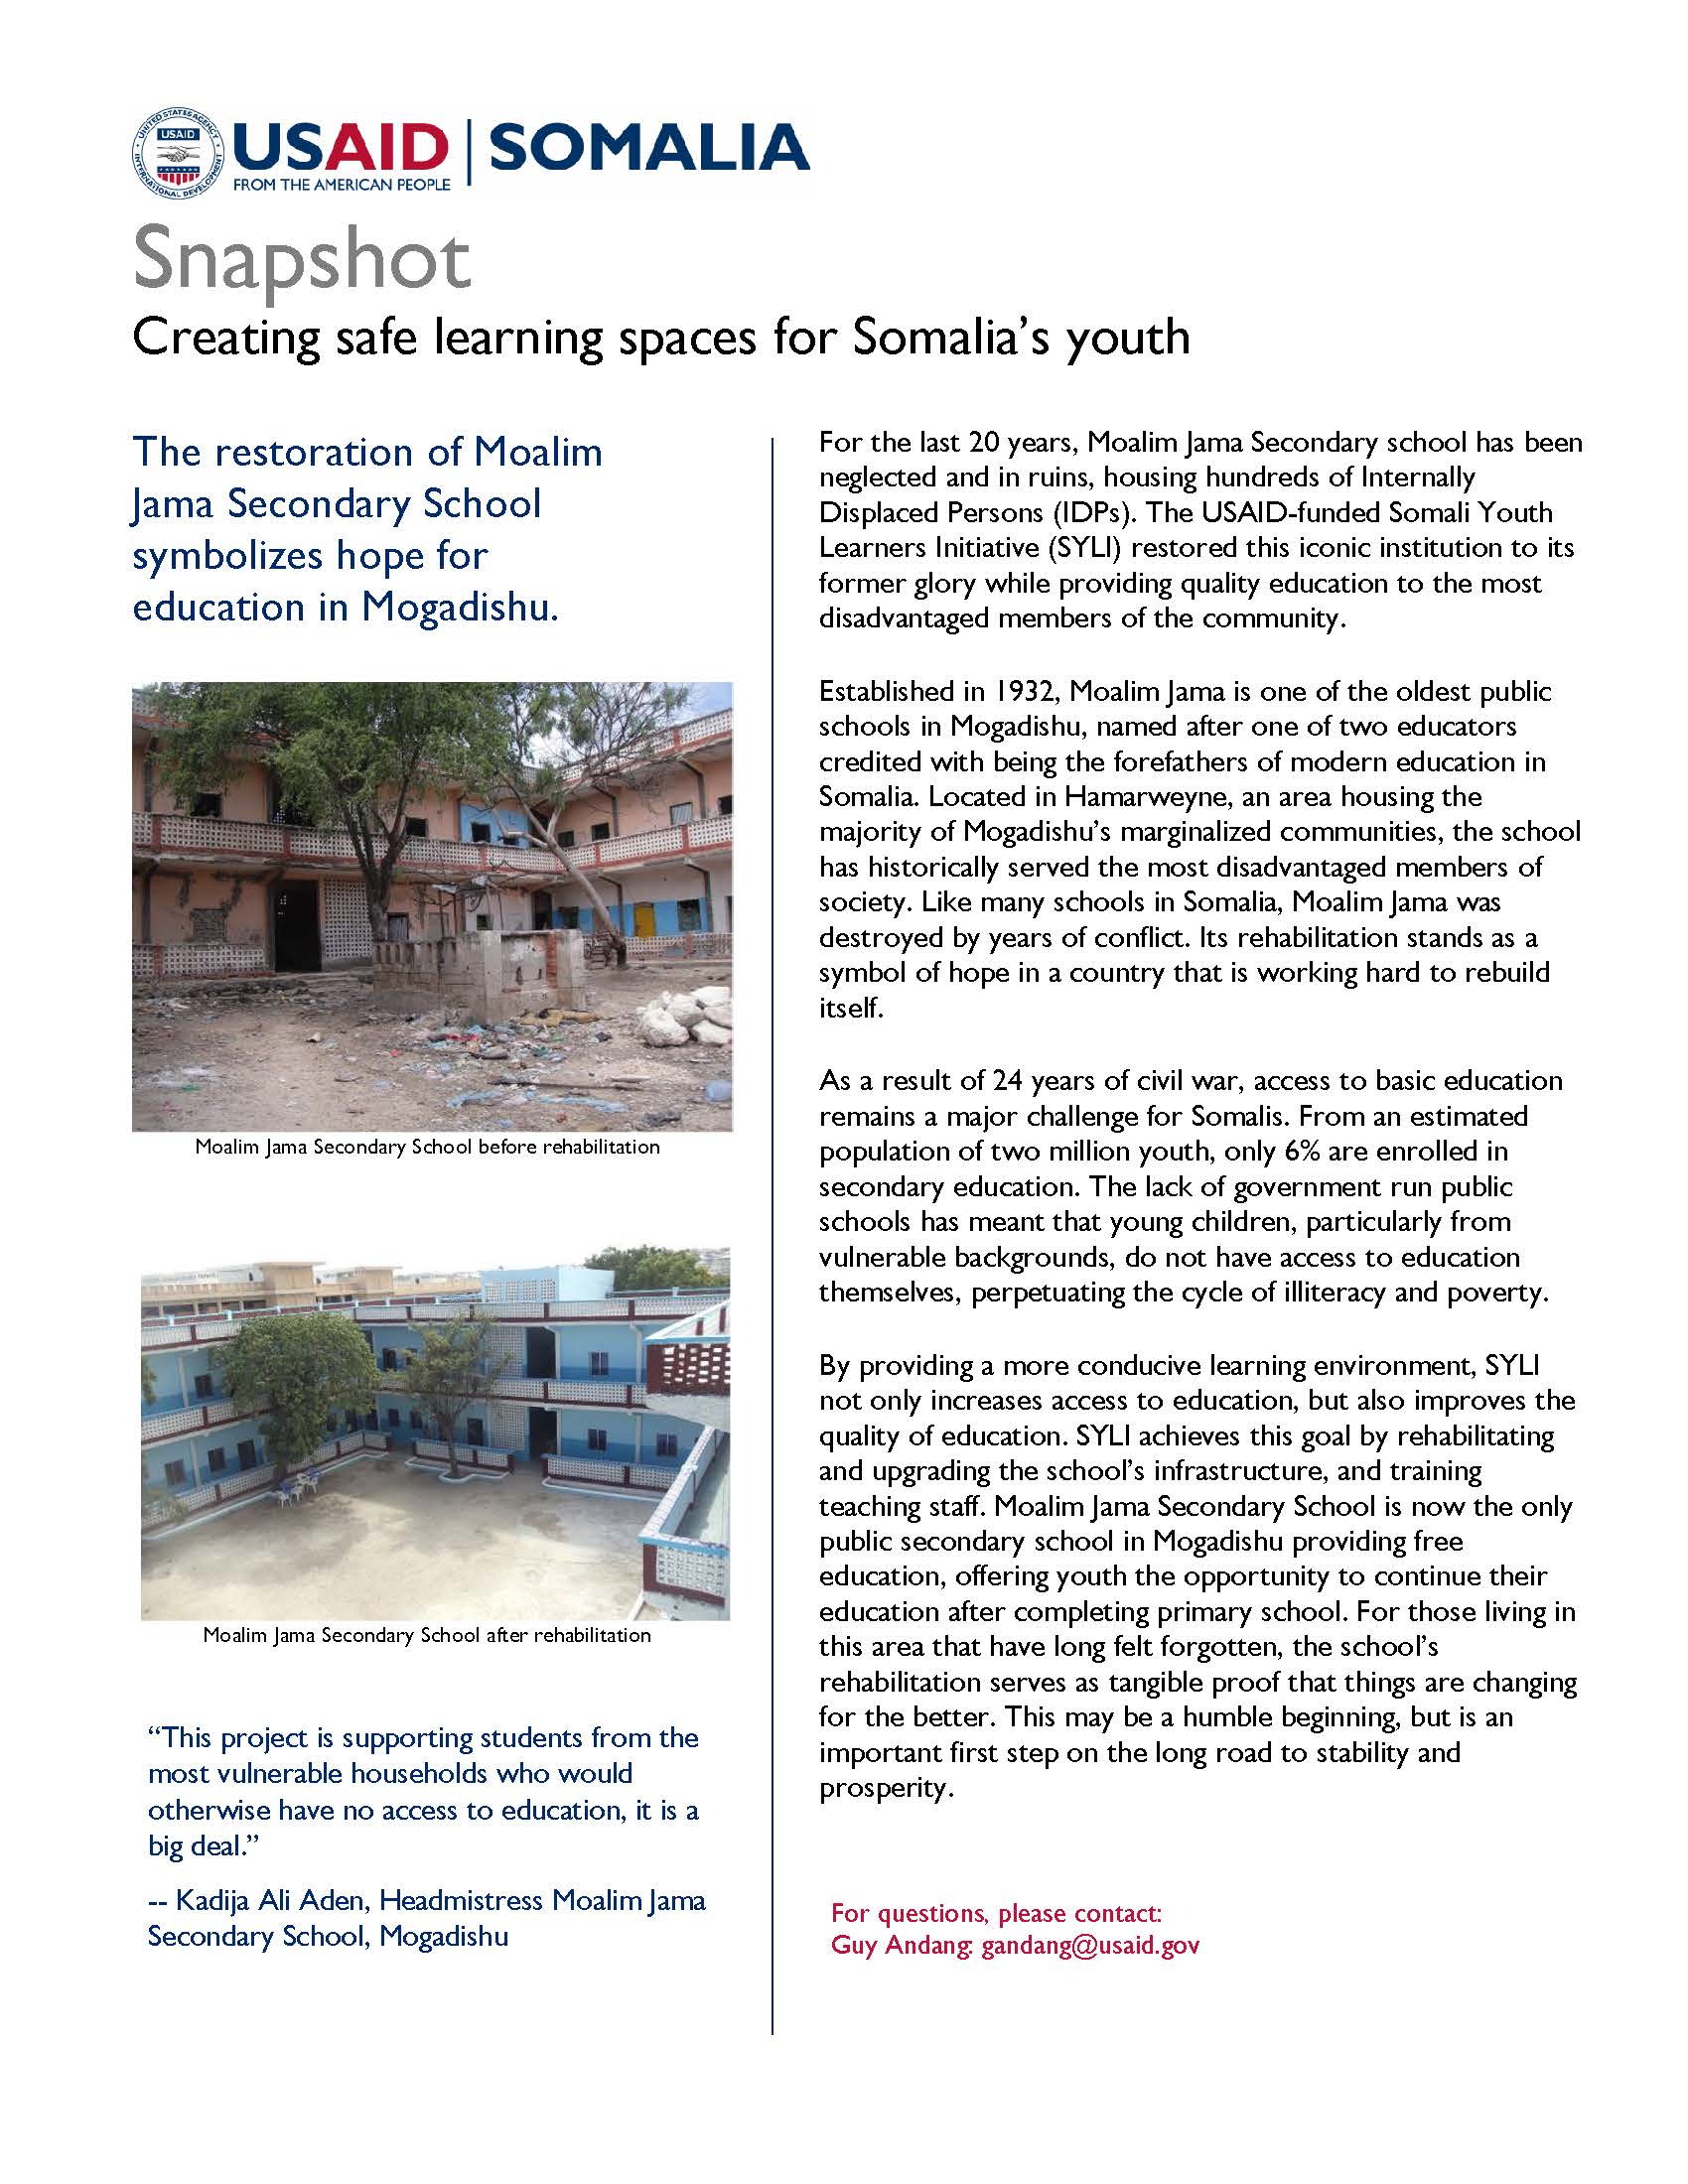 Creating safe learning spaces for Somalia’s youth